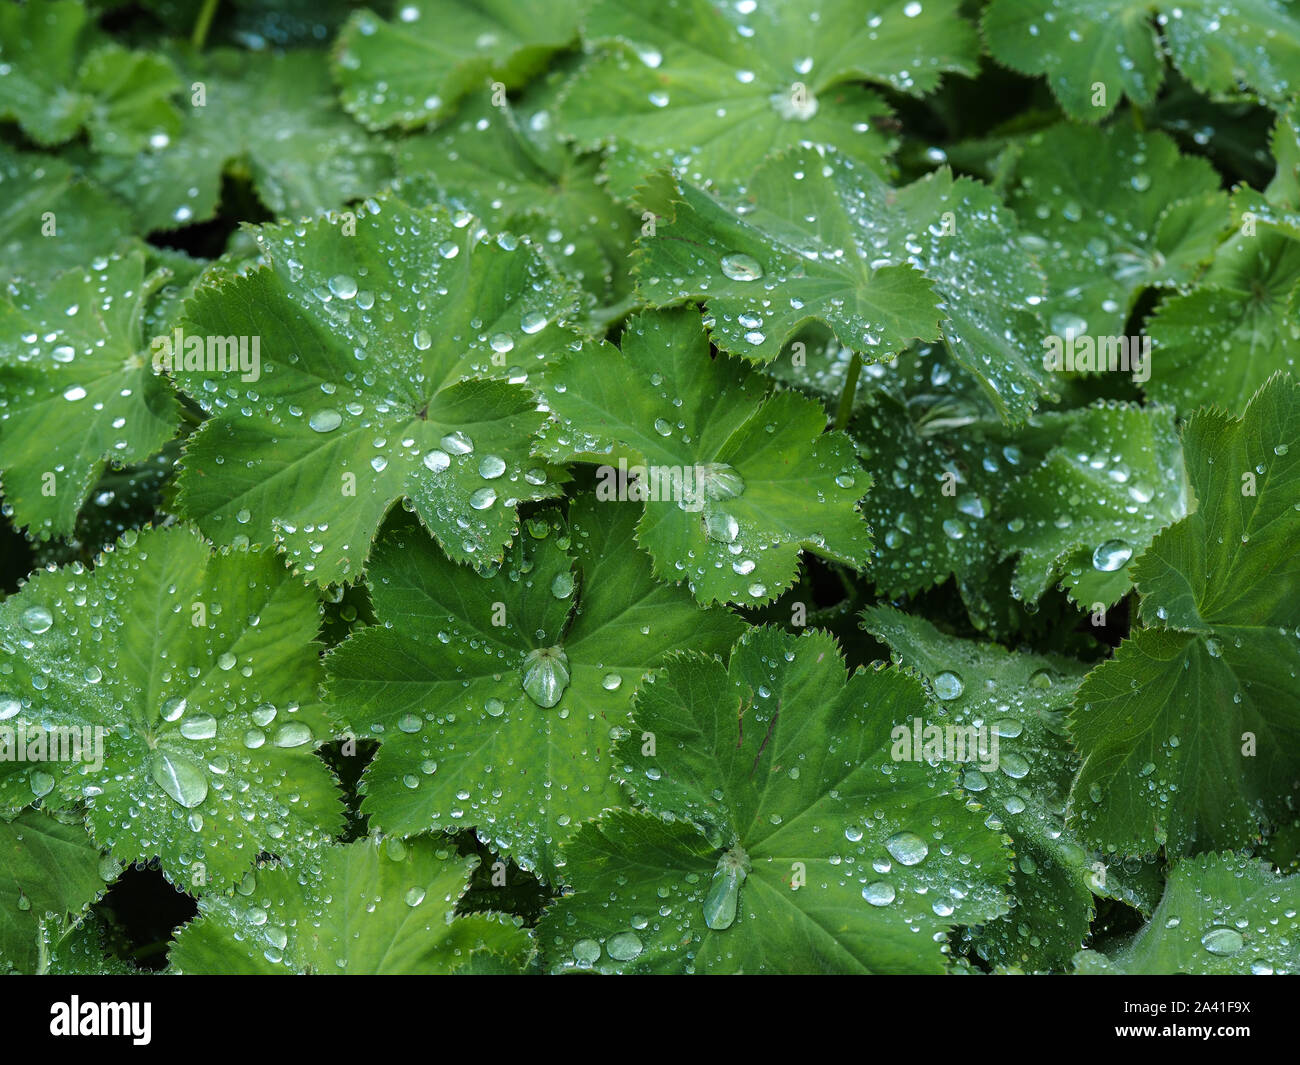 Water droplets from a rain shower on the green leaves of a garden geranium plant Stock Photo